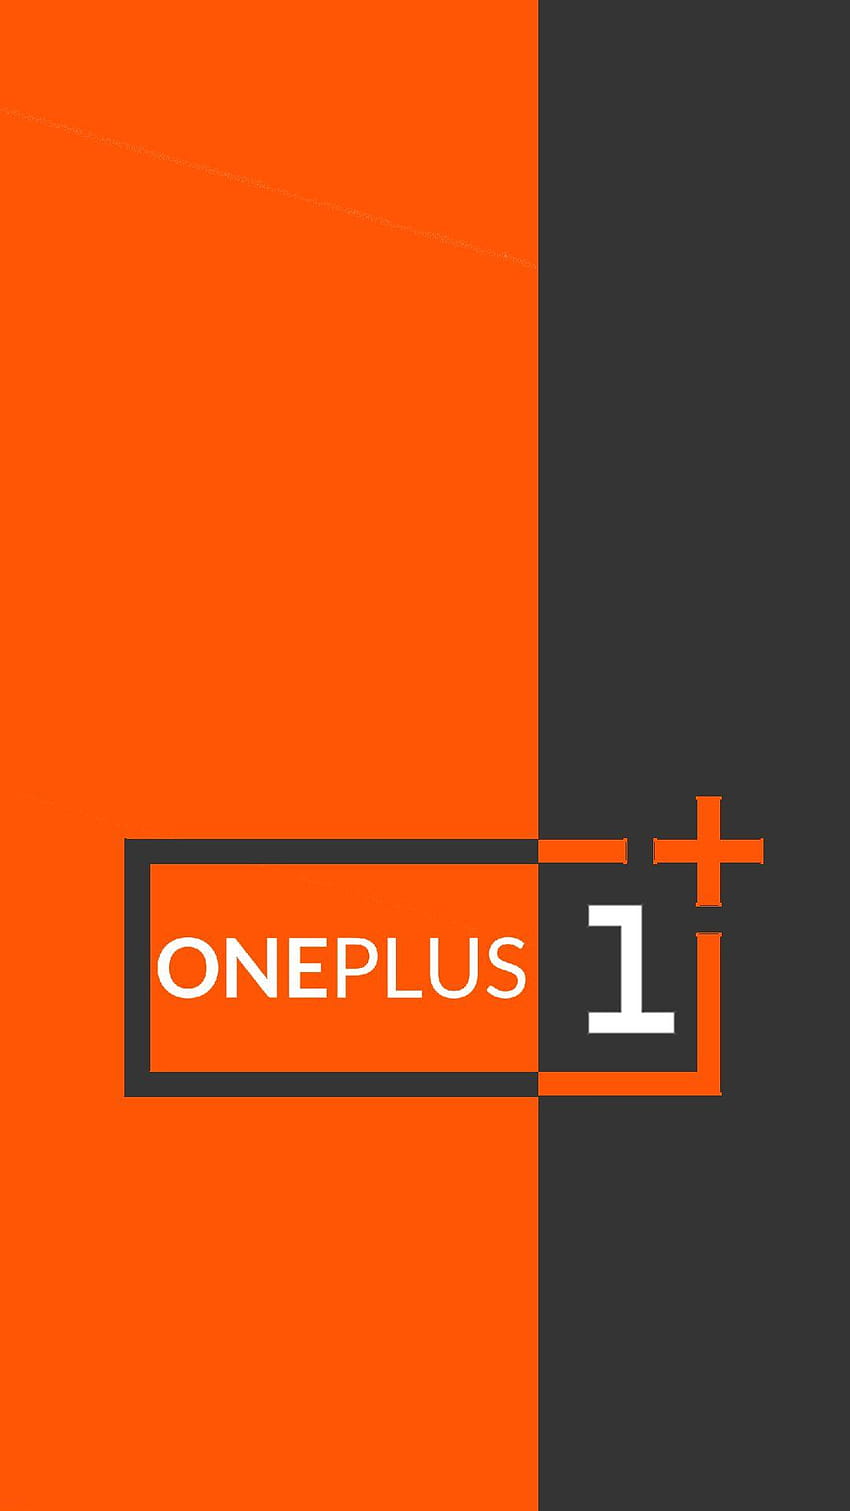 OnePlus - Org Chart, Teams, Culture & Jobs | The Org